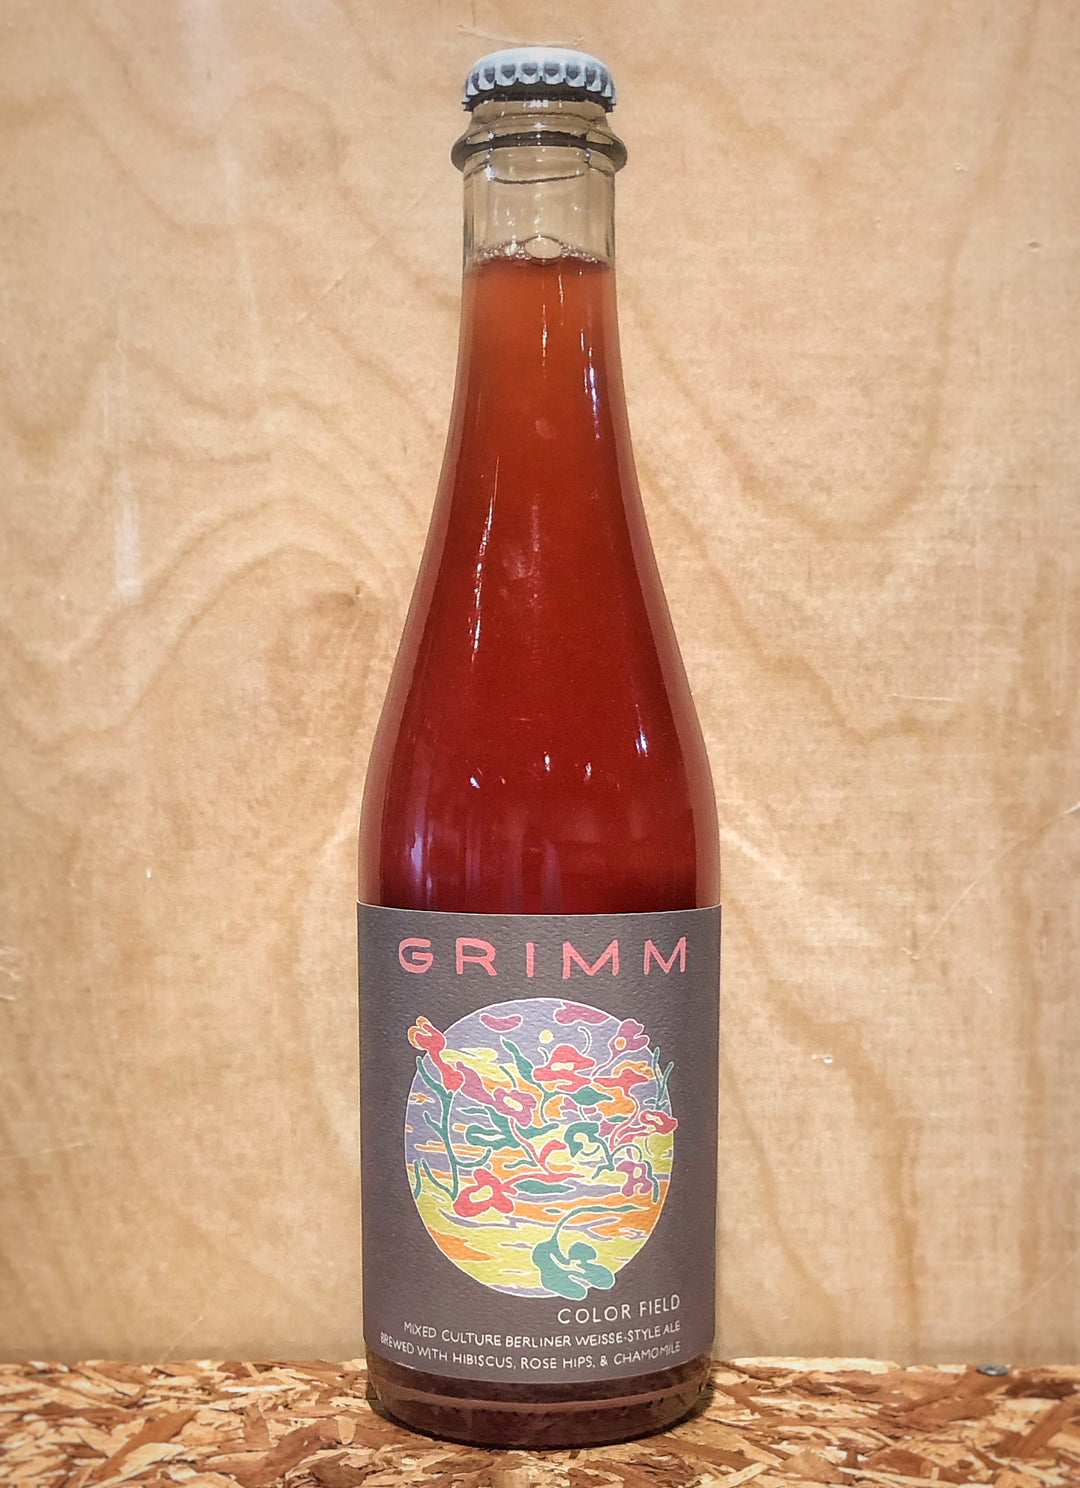 Grimm 'Color Field' Berliner Weisse-Style Ale brewed with Hibiscus, Rose Hips, & Chamomile (Brooklyn, NY)